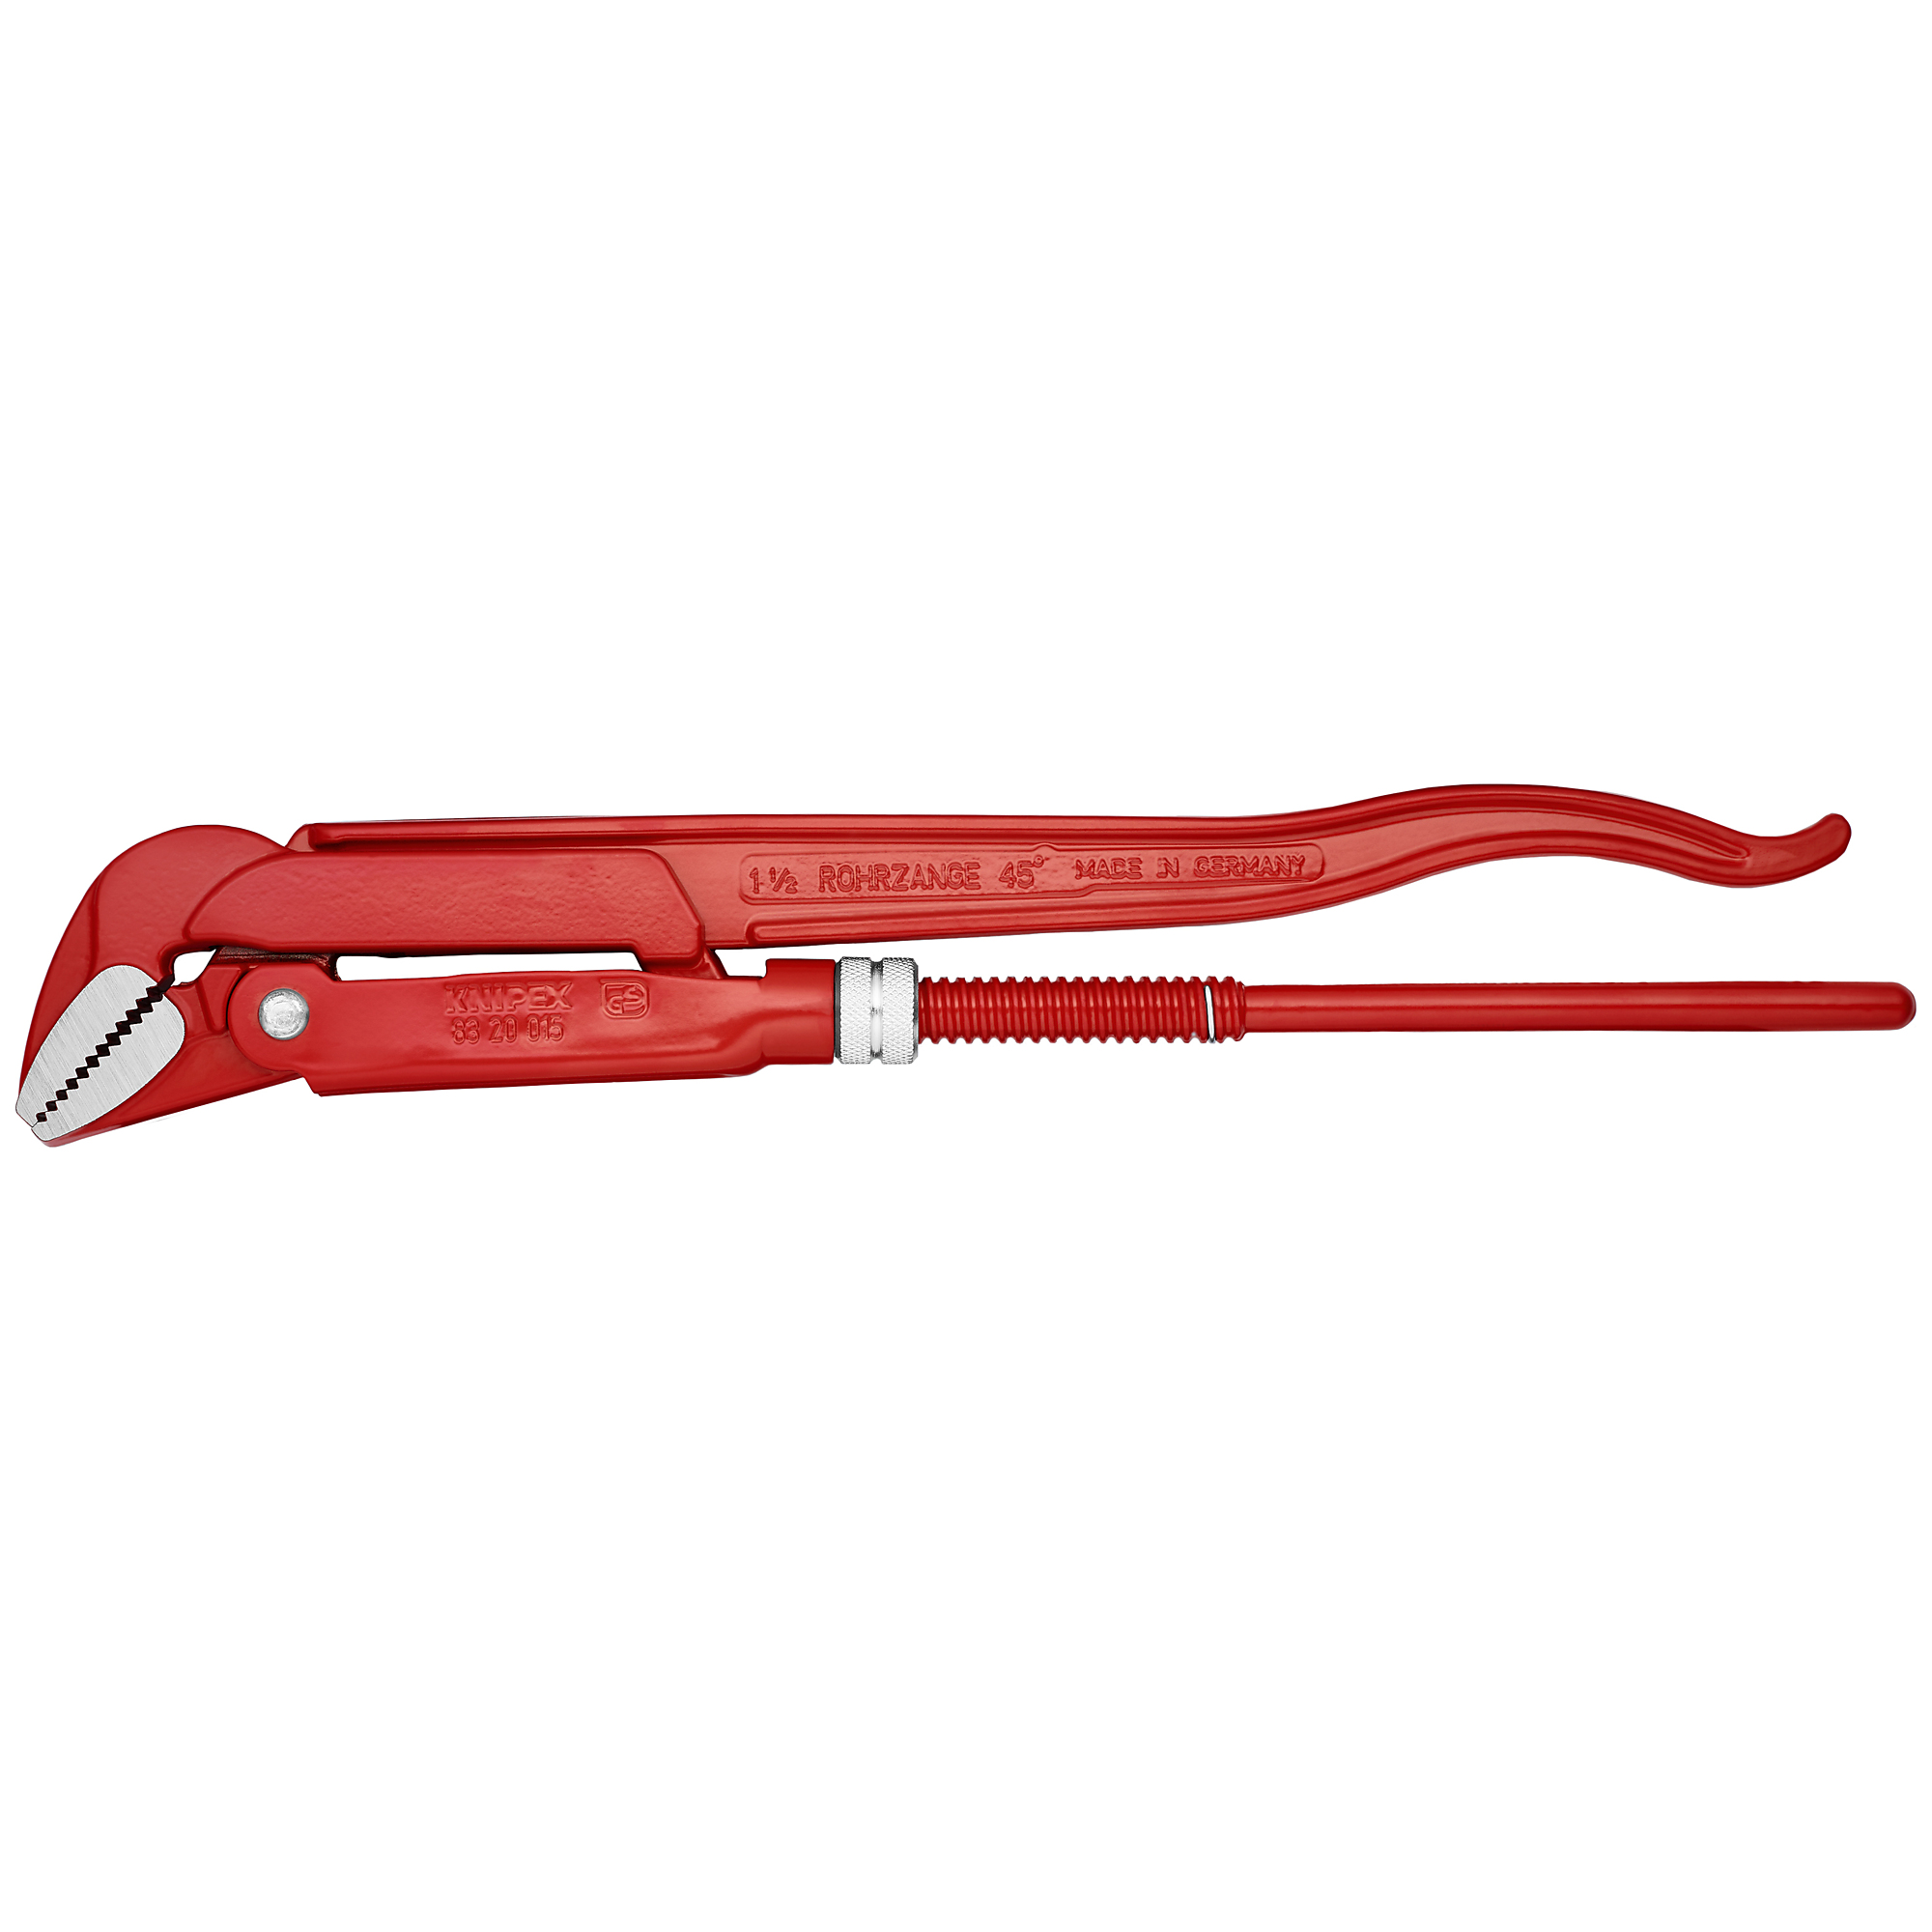 KNIPEX, Swedish Pipe Wrench-45Â°, 16.25Inch, Pieces (qty.) 1 Material Steel, Jaw Capacity 2.046875 in, Model 83 20 015